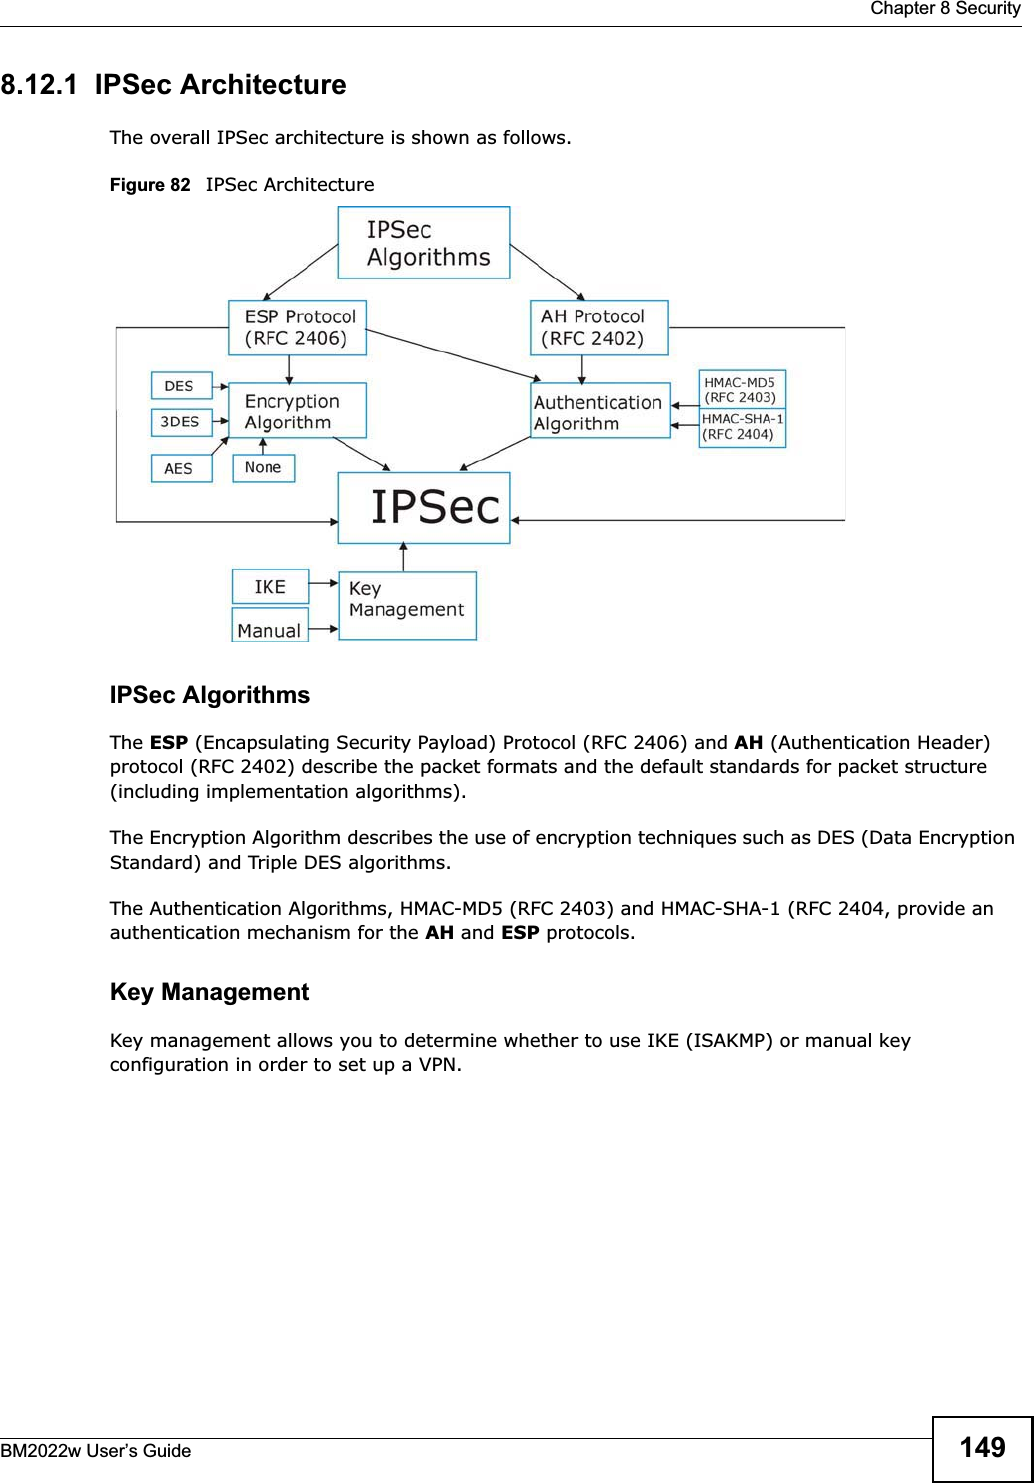  Chapter 8 SecurityBM2022w User’s Guide 1498.12.1  IPSec ArchitectureThe overall IPSec architecture is shown as follows.Figure 82   IPSec ArchitectureIPSec AlgorithmsThe ESP (Encapsulating Security Payload) Protocol (RFC 2406) and AH (Authentication Header) protocol (RFC 2402) describe the packet formats and the default standards for packet structure (including implementation algorithms).The Encryption Algorithm describes the use of encryption techniques such as DES (Data Encryption Standard) and Triple DES algorithms.The Authentication Algorithms, HMAC-MD5 (RFC 2403) and HMAC-SHA-1 (RFC 2404, provide an authentication mechanism for the AH and ESP protocols. Key ManagementKey management allows you to determine whether to use IKE (ISAKMP) or manual key configuration in order to set up a VPN.